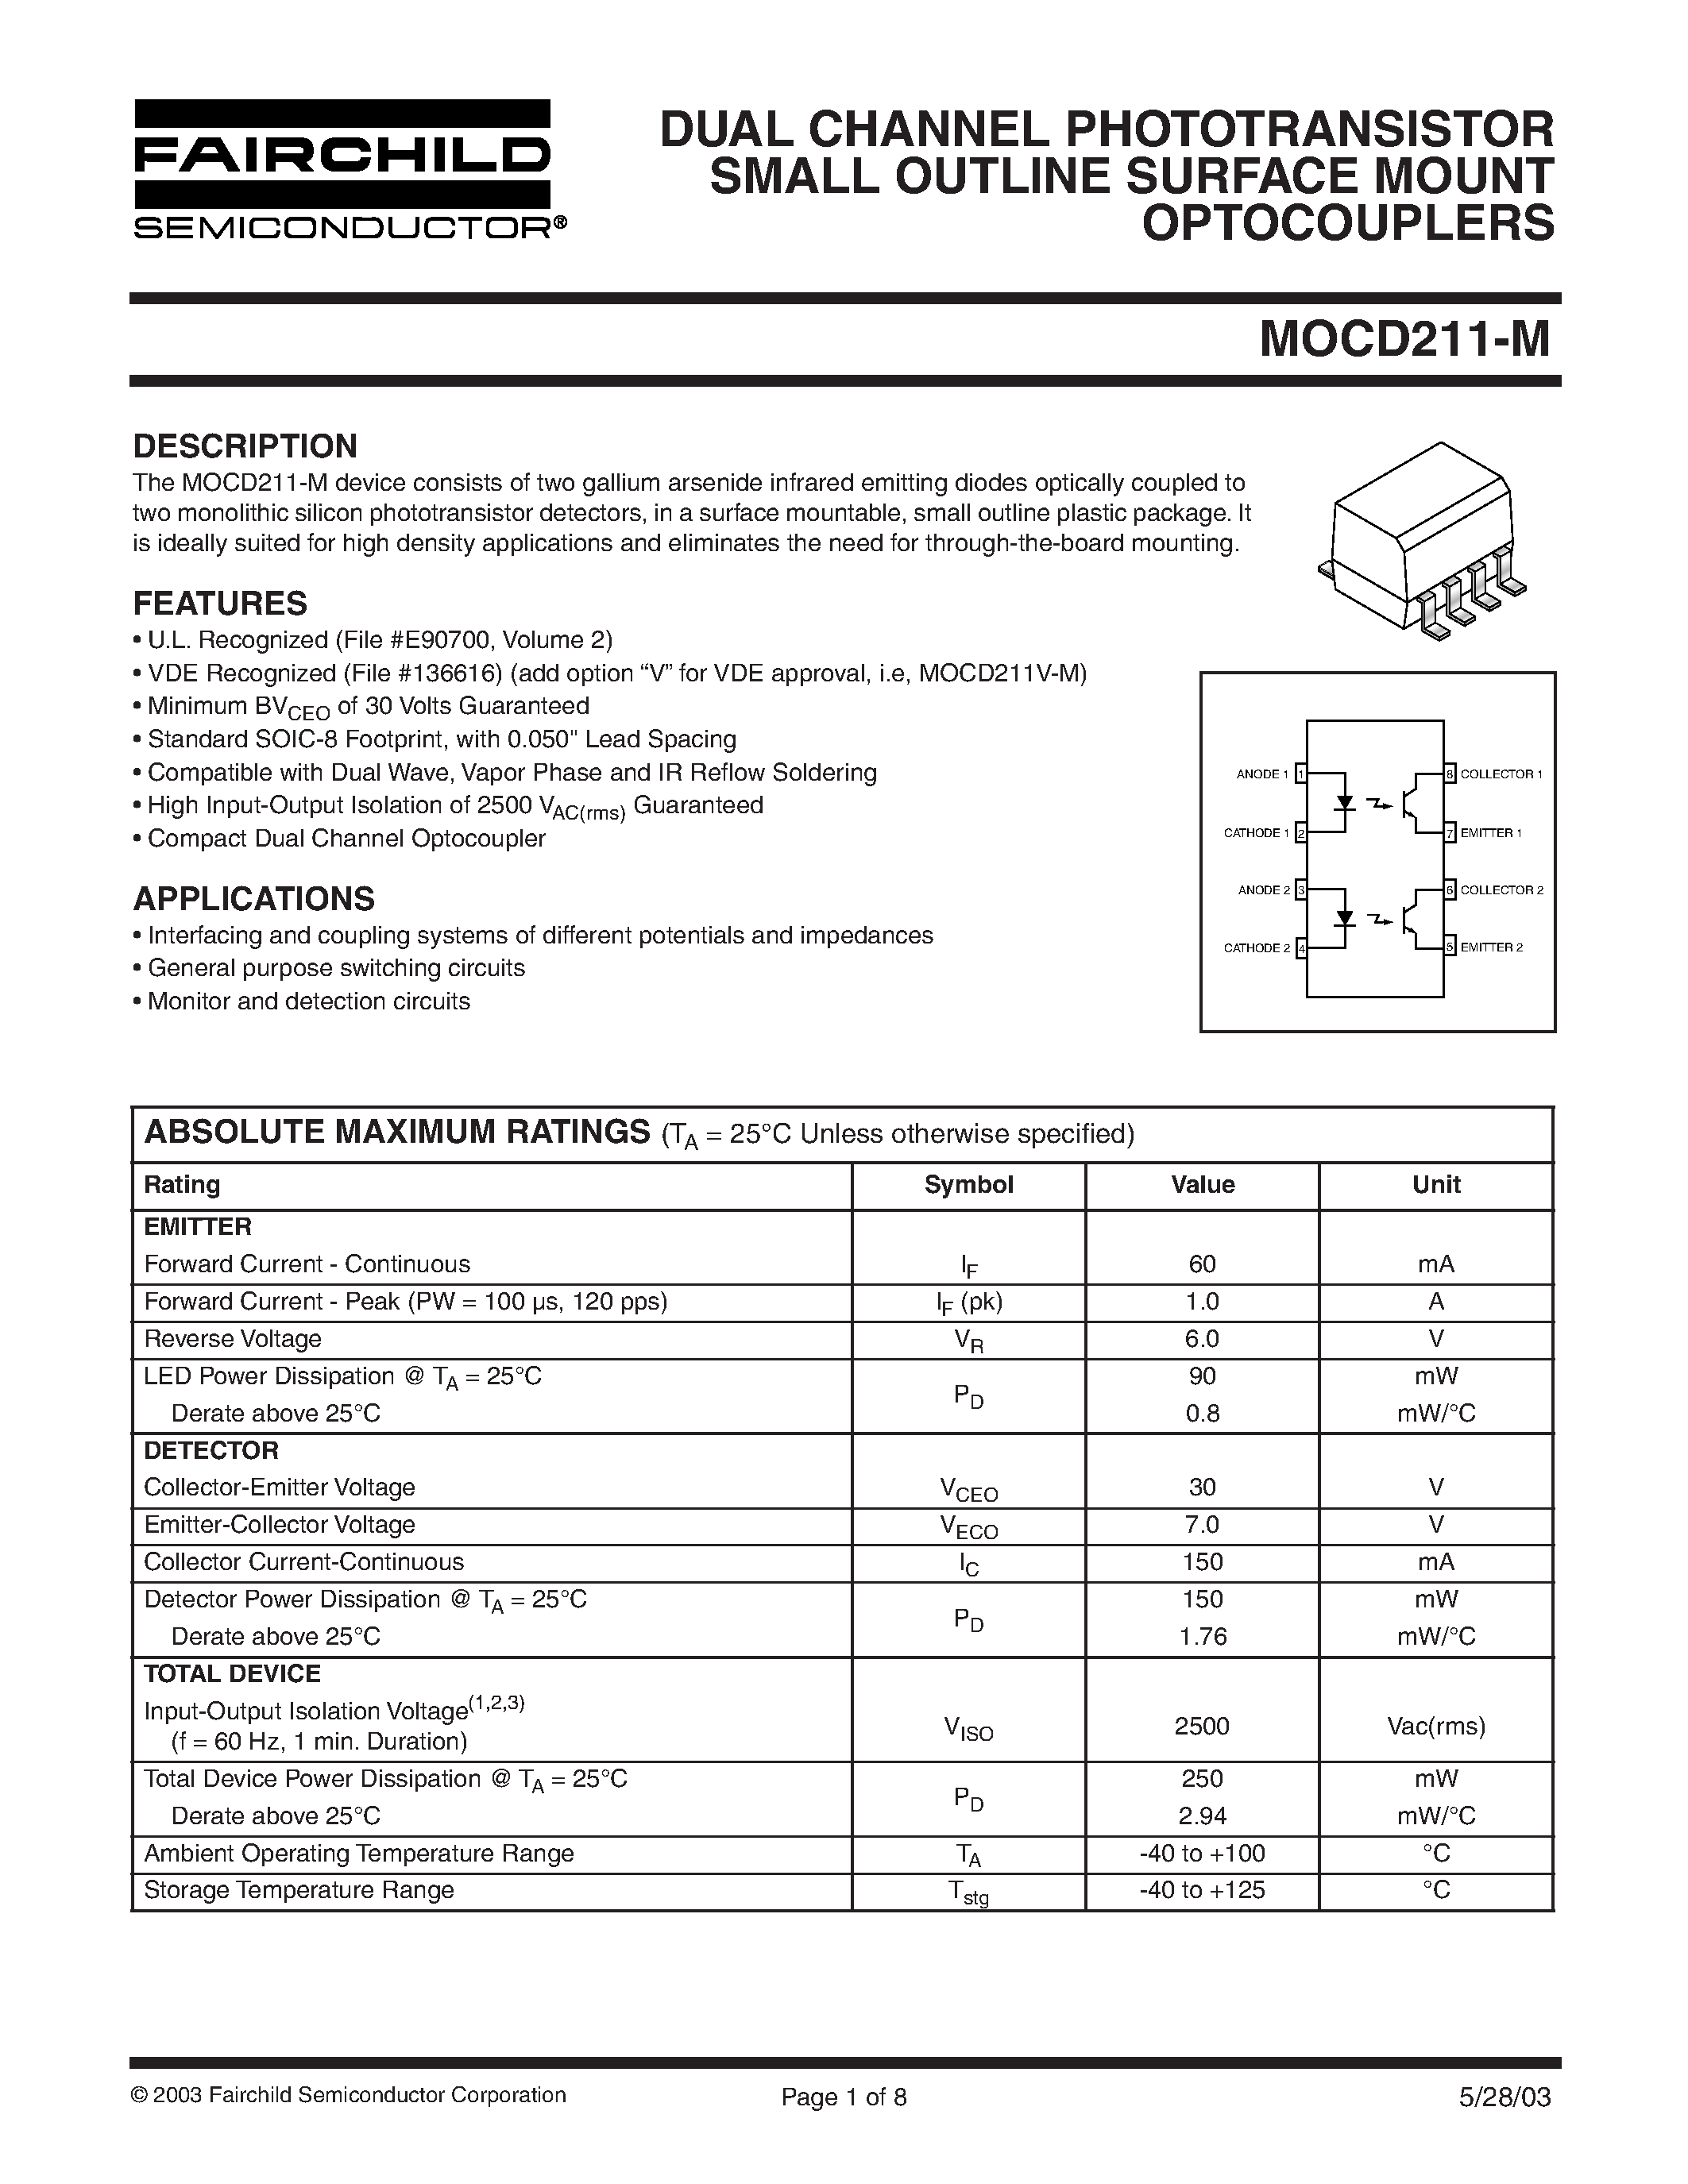 Даташит MOCD211-M - DUAL CHANNEL PHOTOTRANSISTOR SMALL OUTLINE SURFACE MOUNT OPTOCOUPLERS страница 1